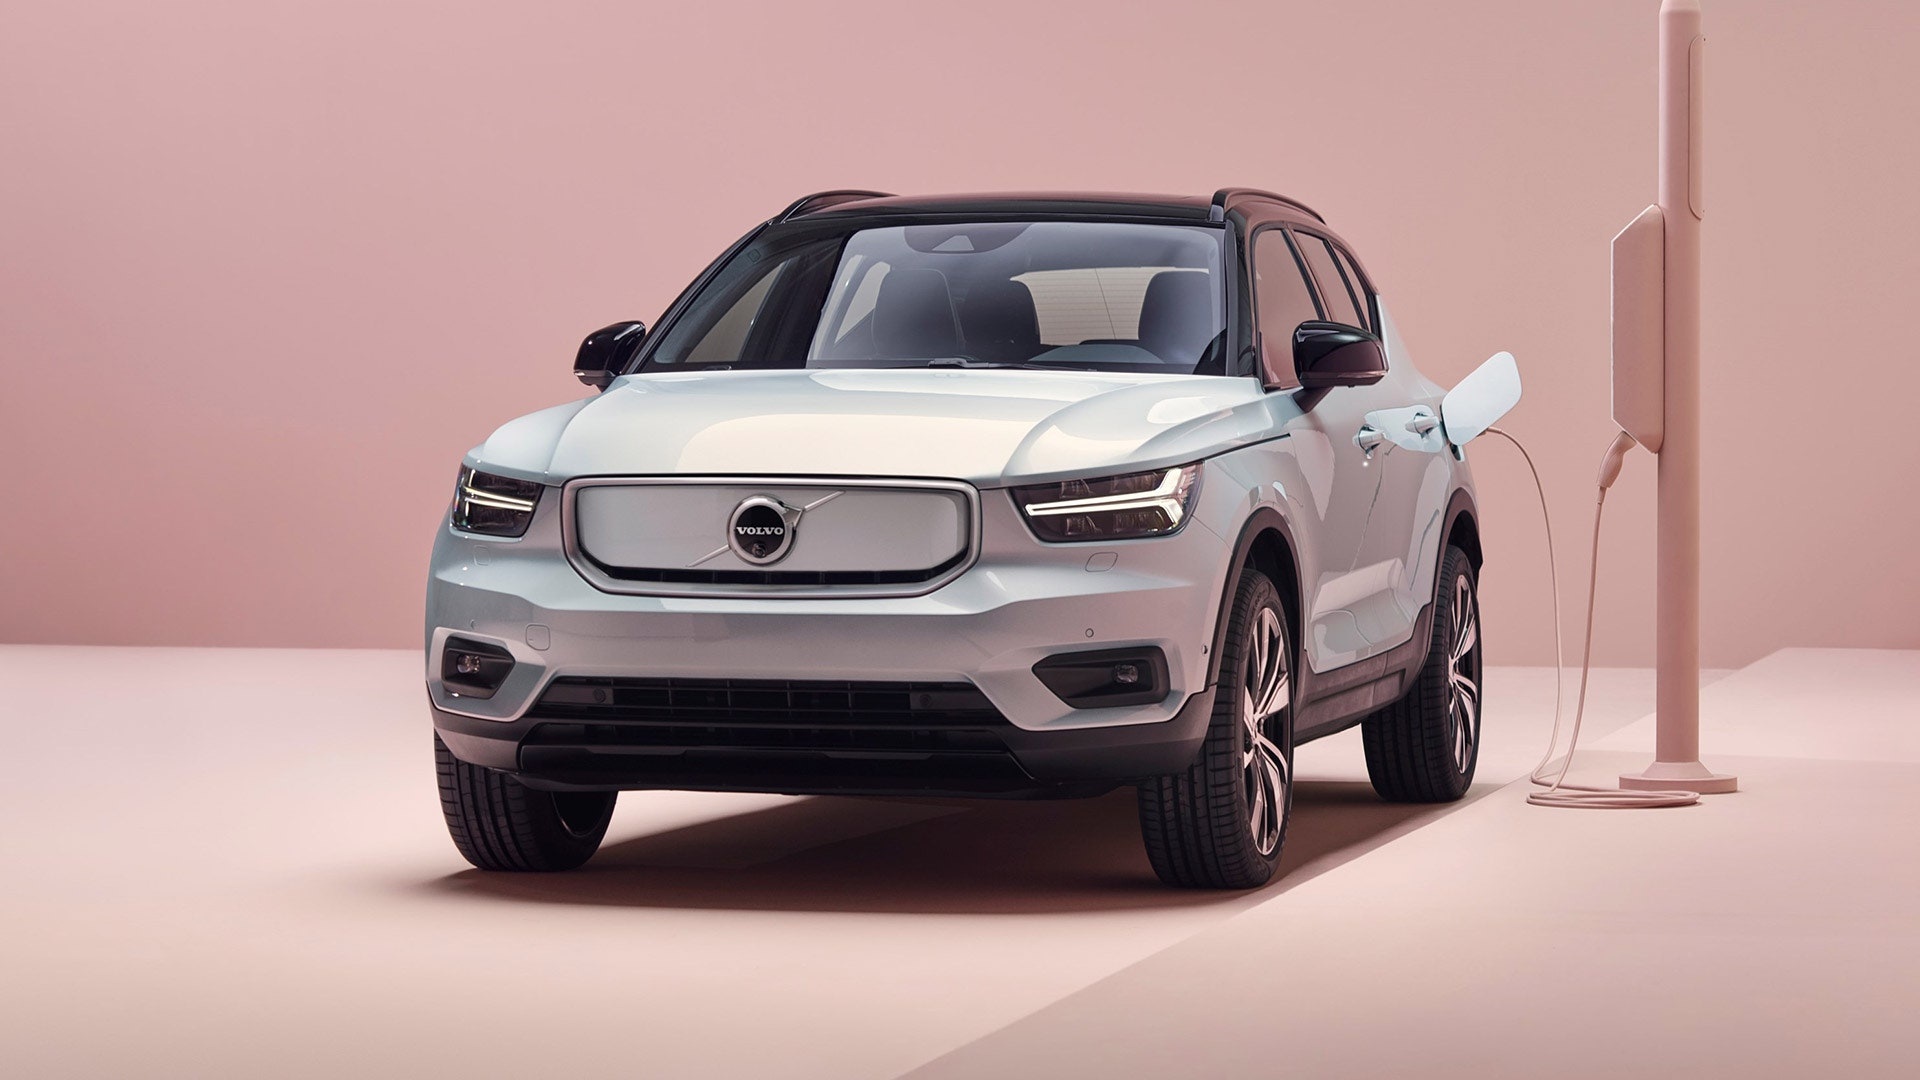 Volvo XC40 Recharge, Electric SUV, Grown-up sophistication, British style, 1920x1080 Full HD Desktop